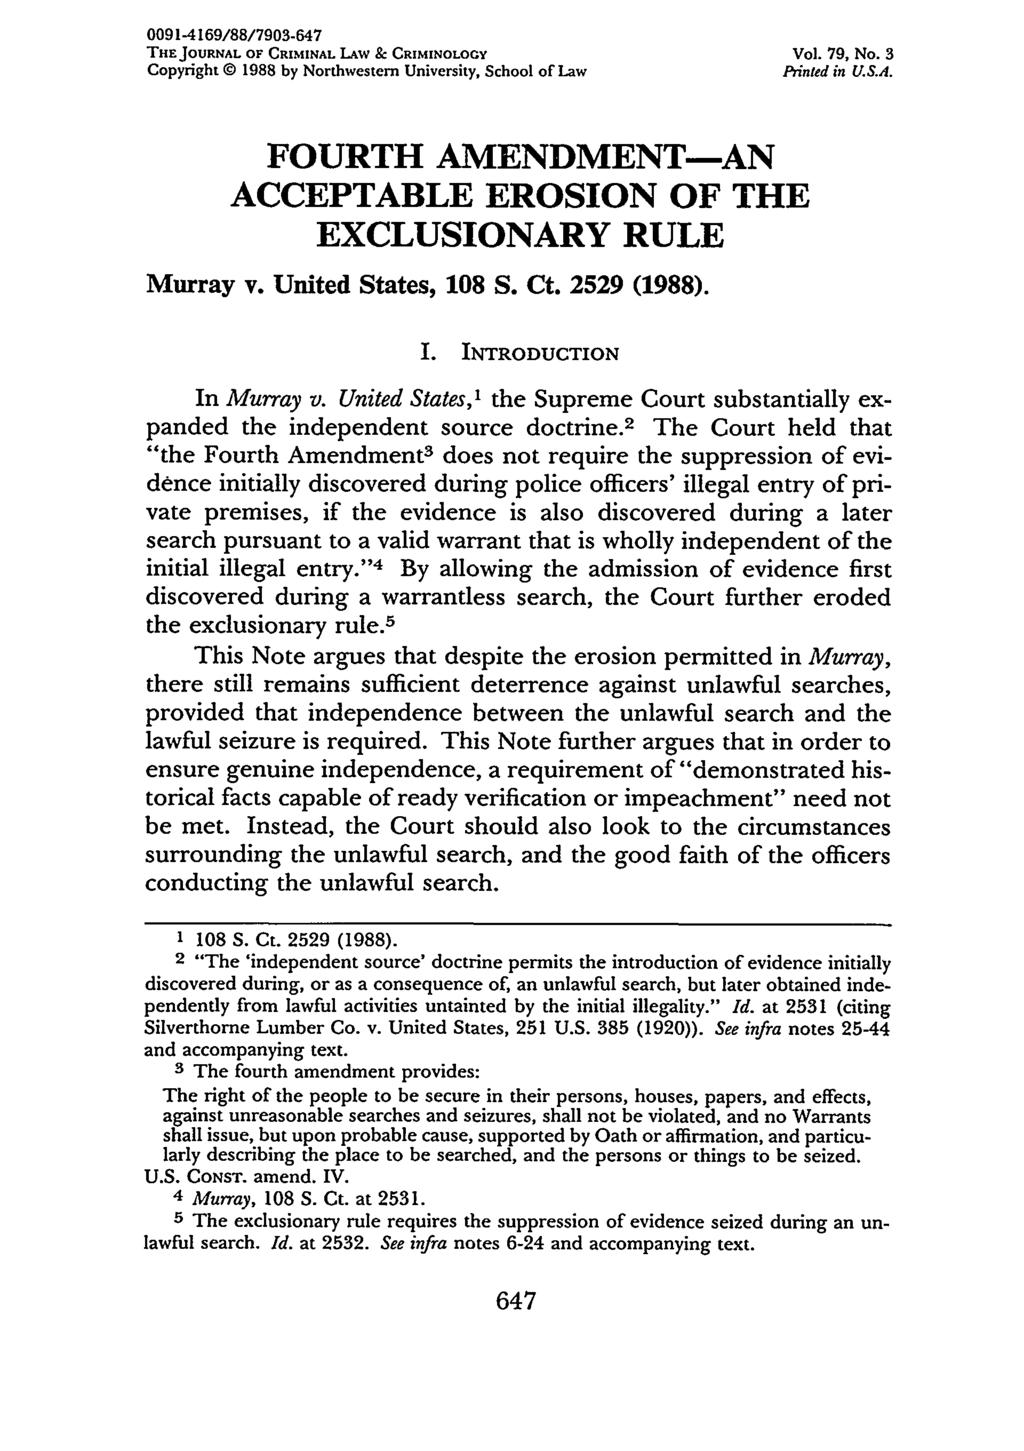 0091-4169/88/7903-647 THE JOURNAL OF CRIMINAL LAW & CRIMINOLOGY Vol. 79, No. 3 Copyright @ 1988 by Northwestern University, School of Law Printed in U.S.A. FOURTH AMENDMENT-AN ACCEPTABLE EROSION OF THE EXCLUSIONARY RULE Murray v.